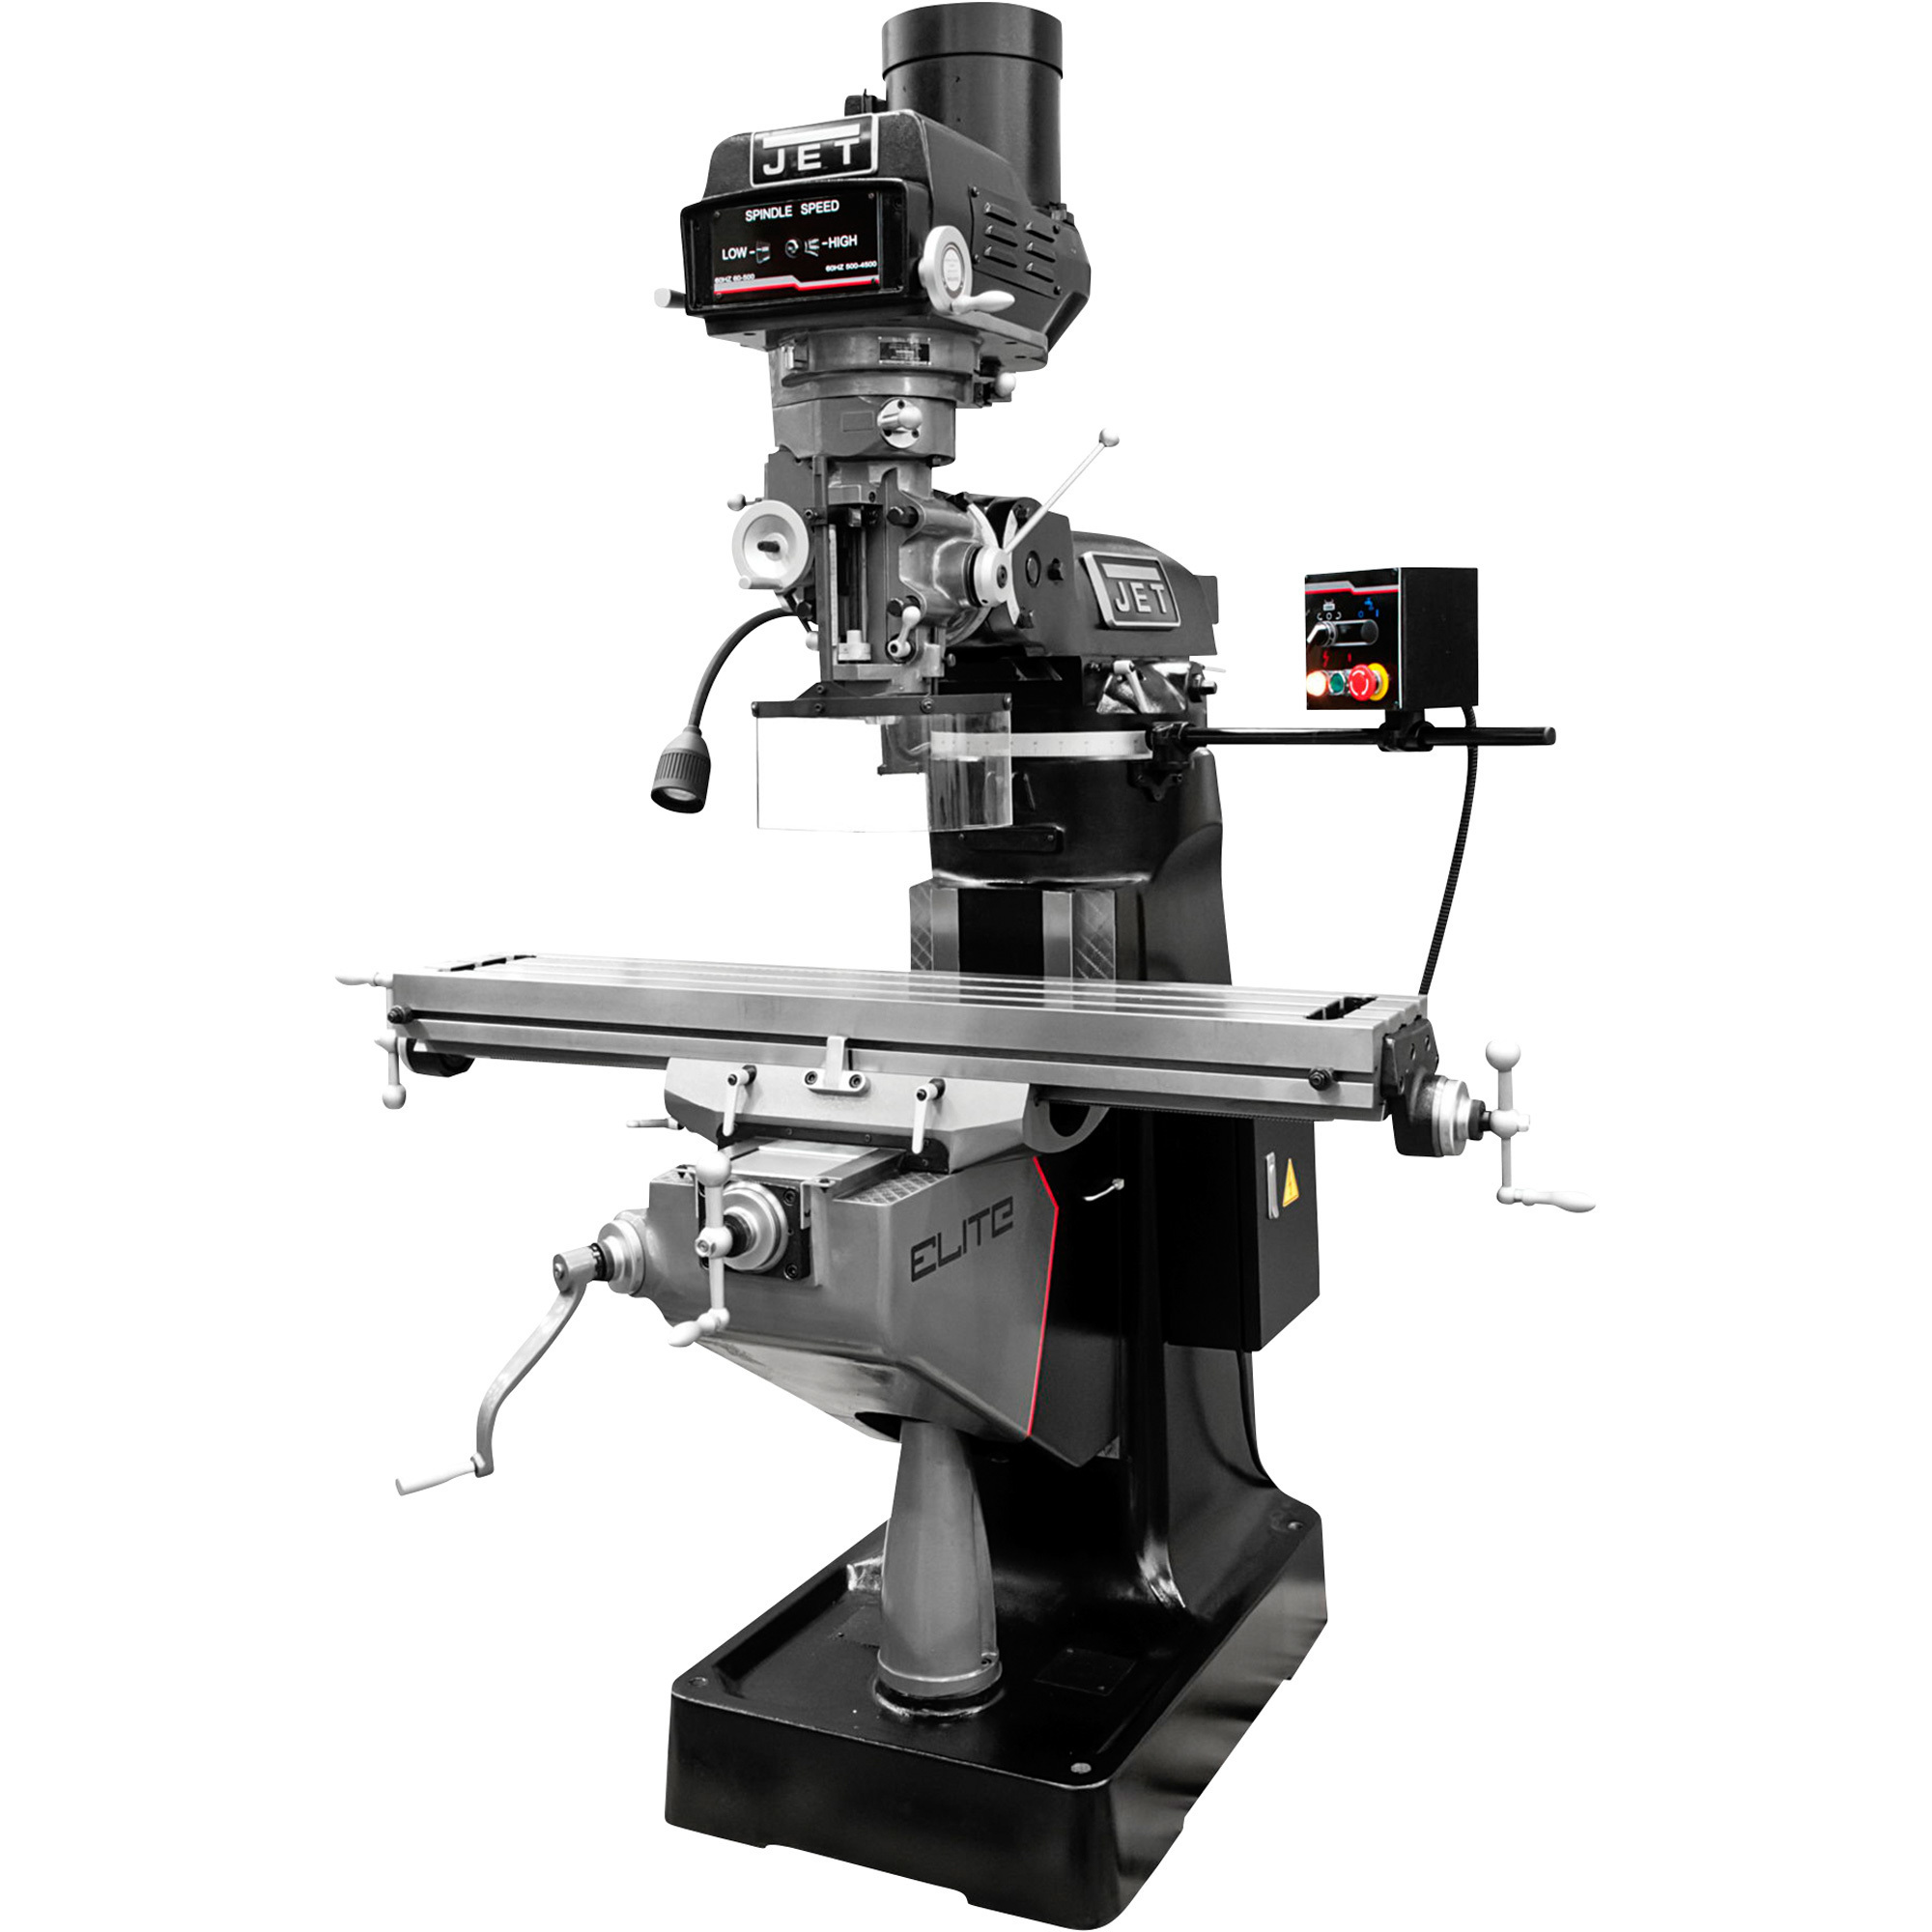 JET Elite Mill with 2-Axis ACU-RITE 303 DRO, X, Y, Z-Axis Powerfeeds and Power Air Draw Bar, 9Inch x 49Inch Table, 3 HP, Model ETM-949 -  894136